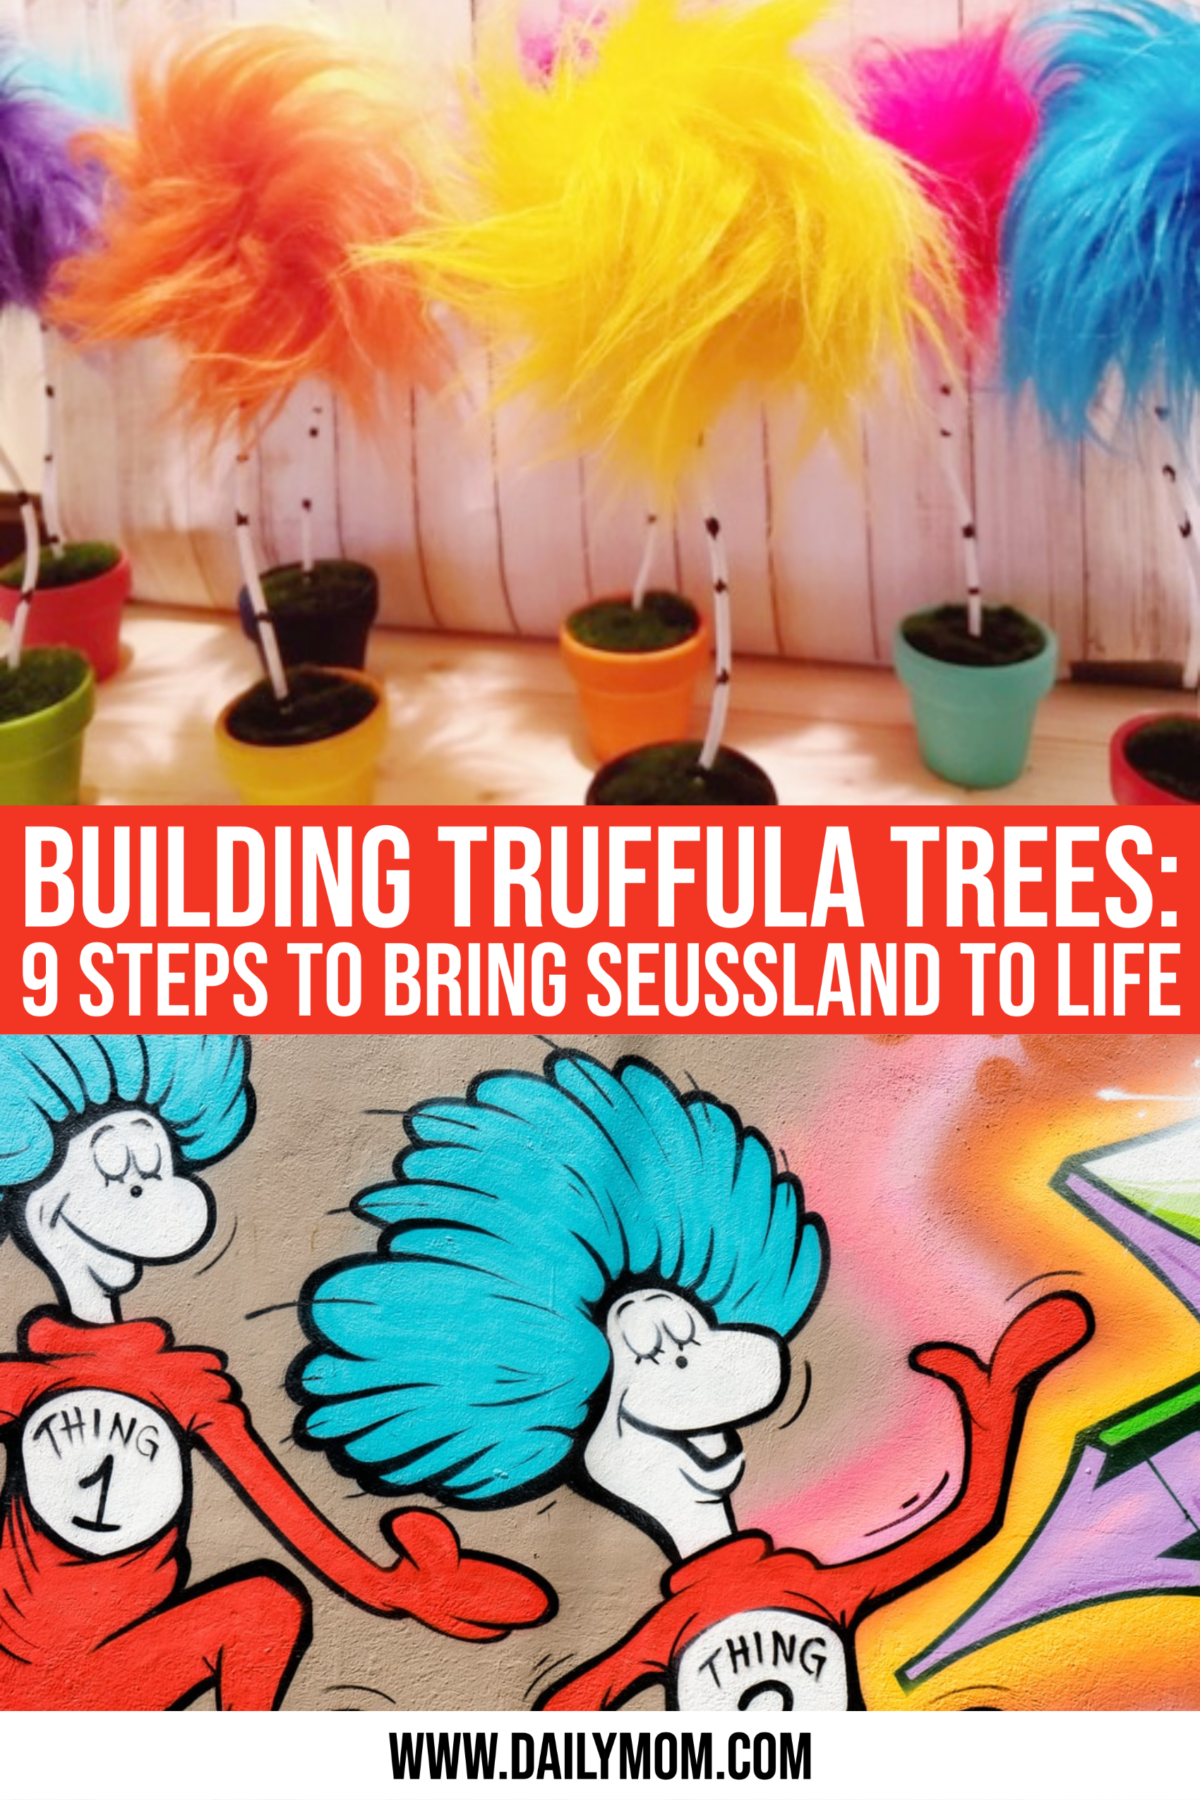 Building Truffula Trees: 9 Easy Steps To Bring Seussland To Life!